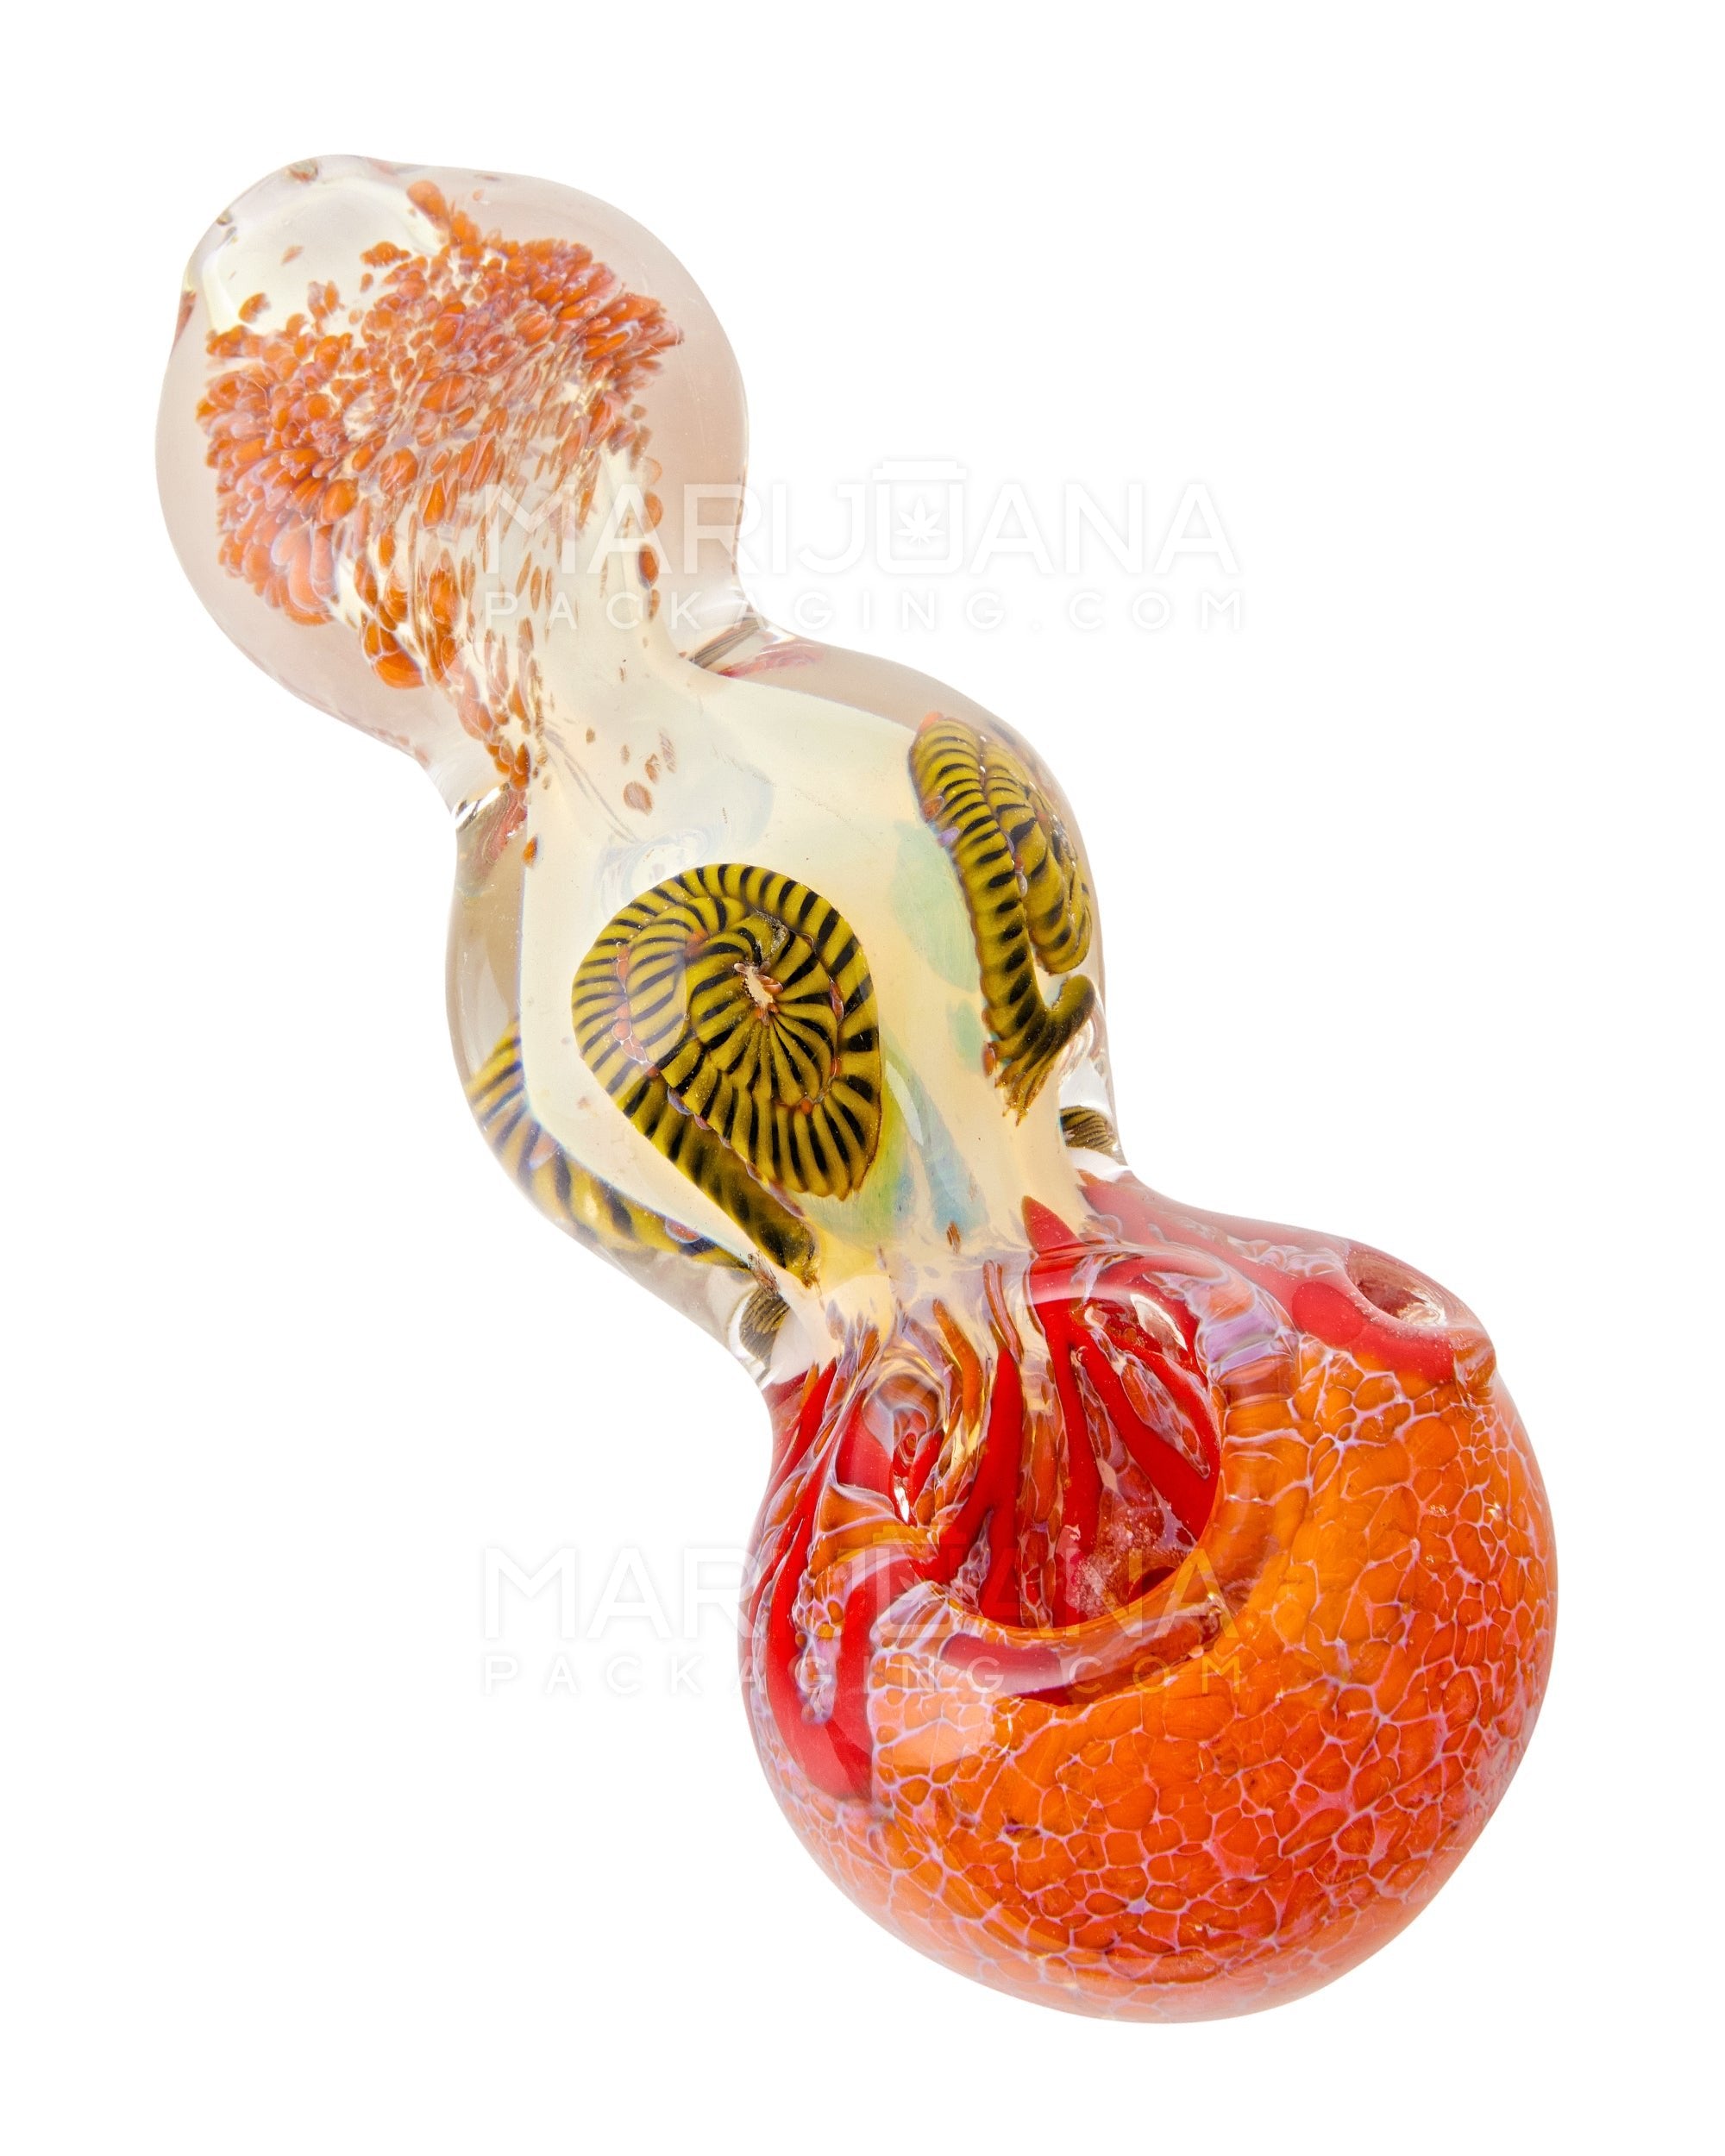 Frit & Fumed Spoon Hand Pipe w/ Ribboning | 4.5in Long - Glass - Assorted - 6